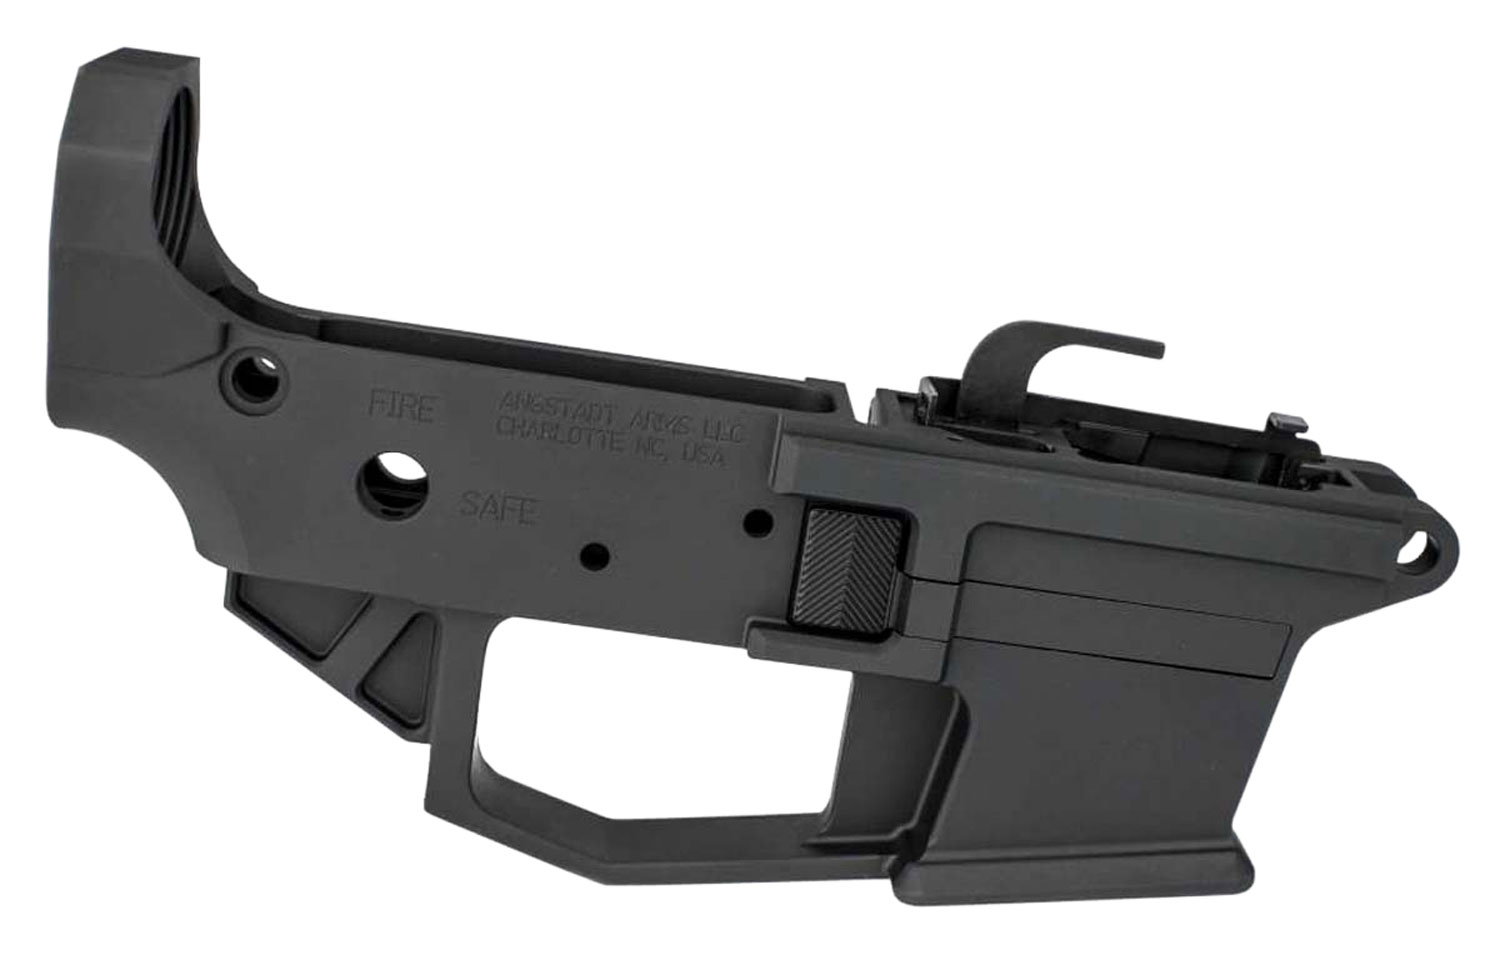 Angstadt Arms AA0940LRBA 0940 Lower Receiver 9mm Luger Black Anodized Finish 7075-T6 Aluminum Material with Mil-Spec Dimensions & Compatible with Glock Mags for AR-15